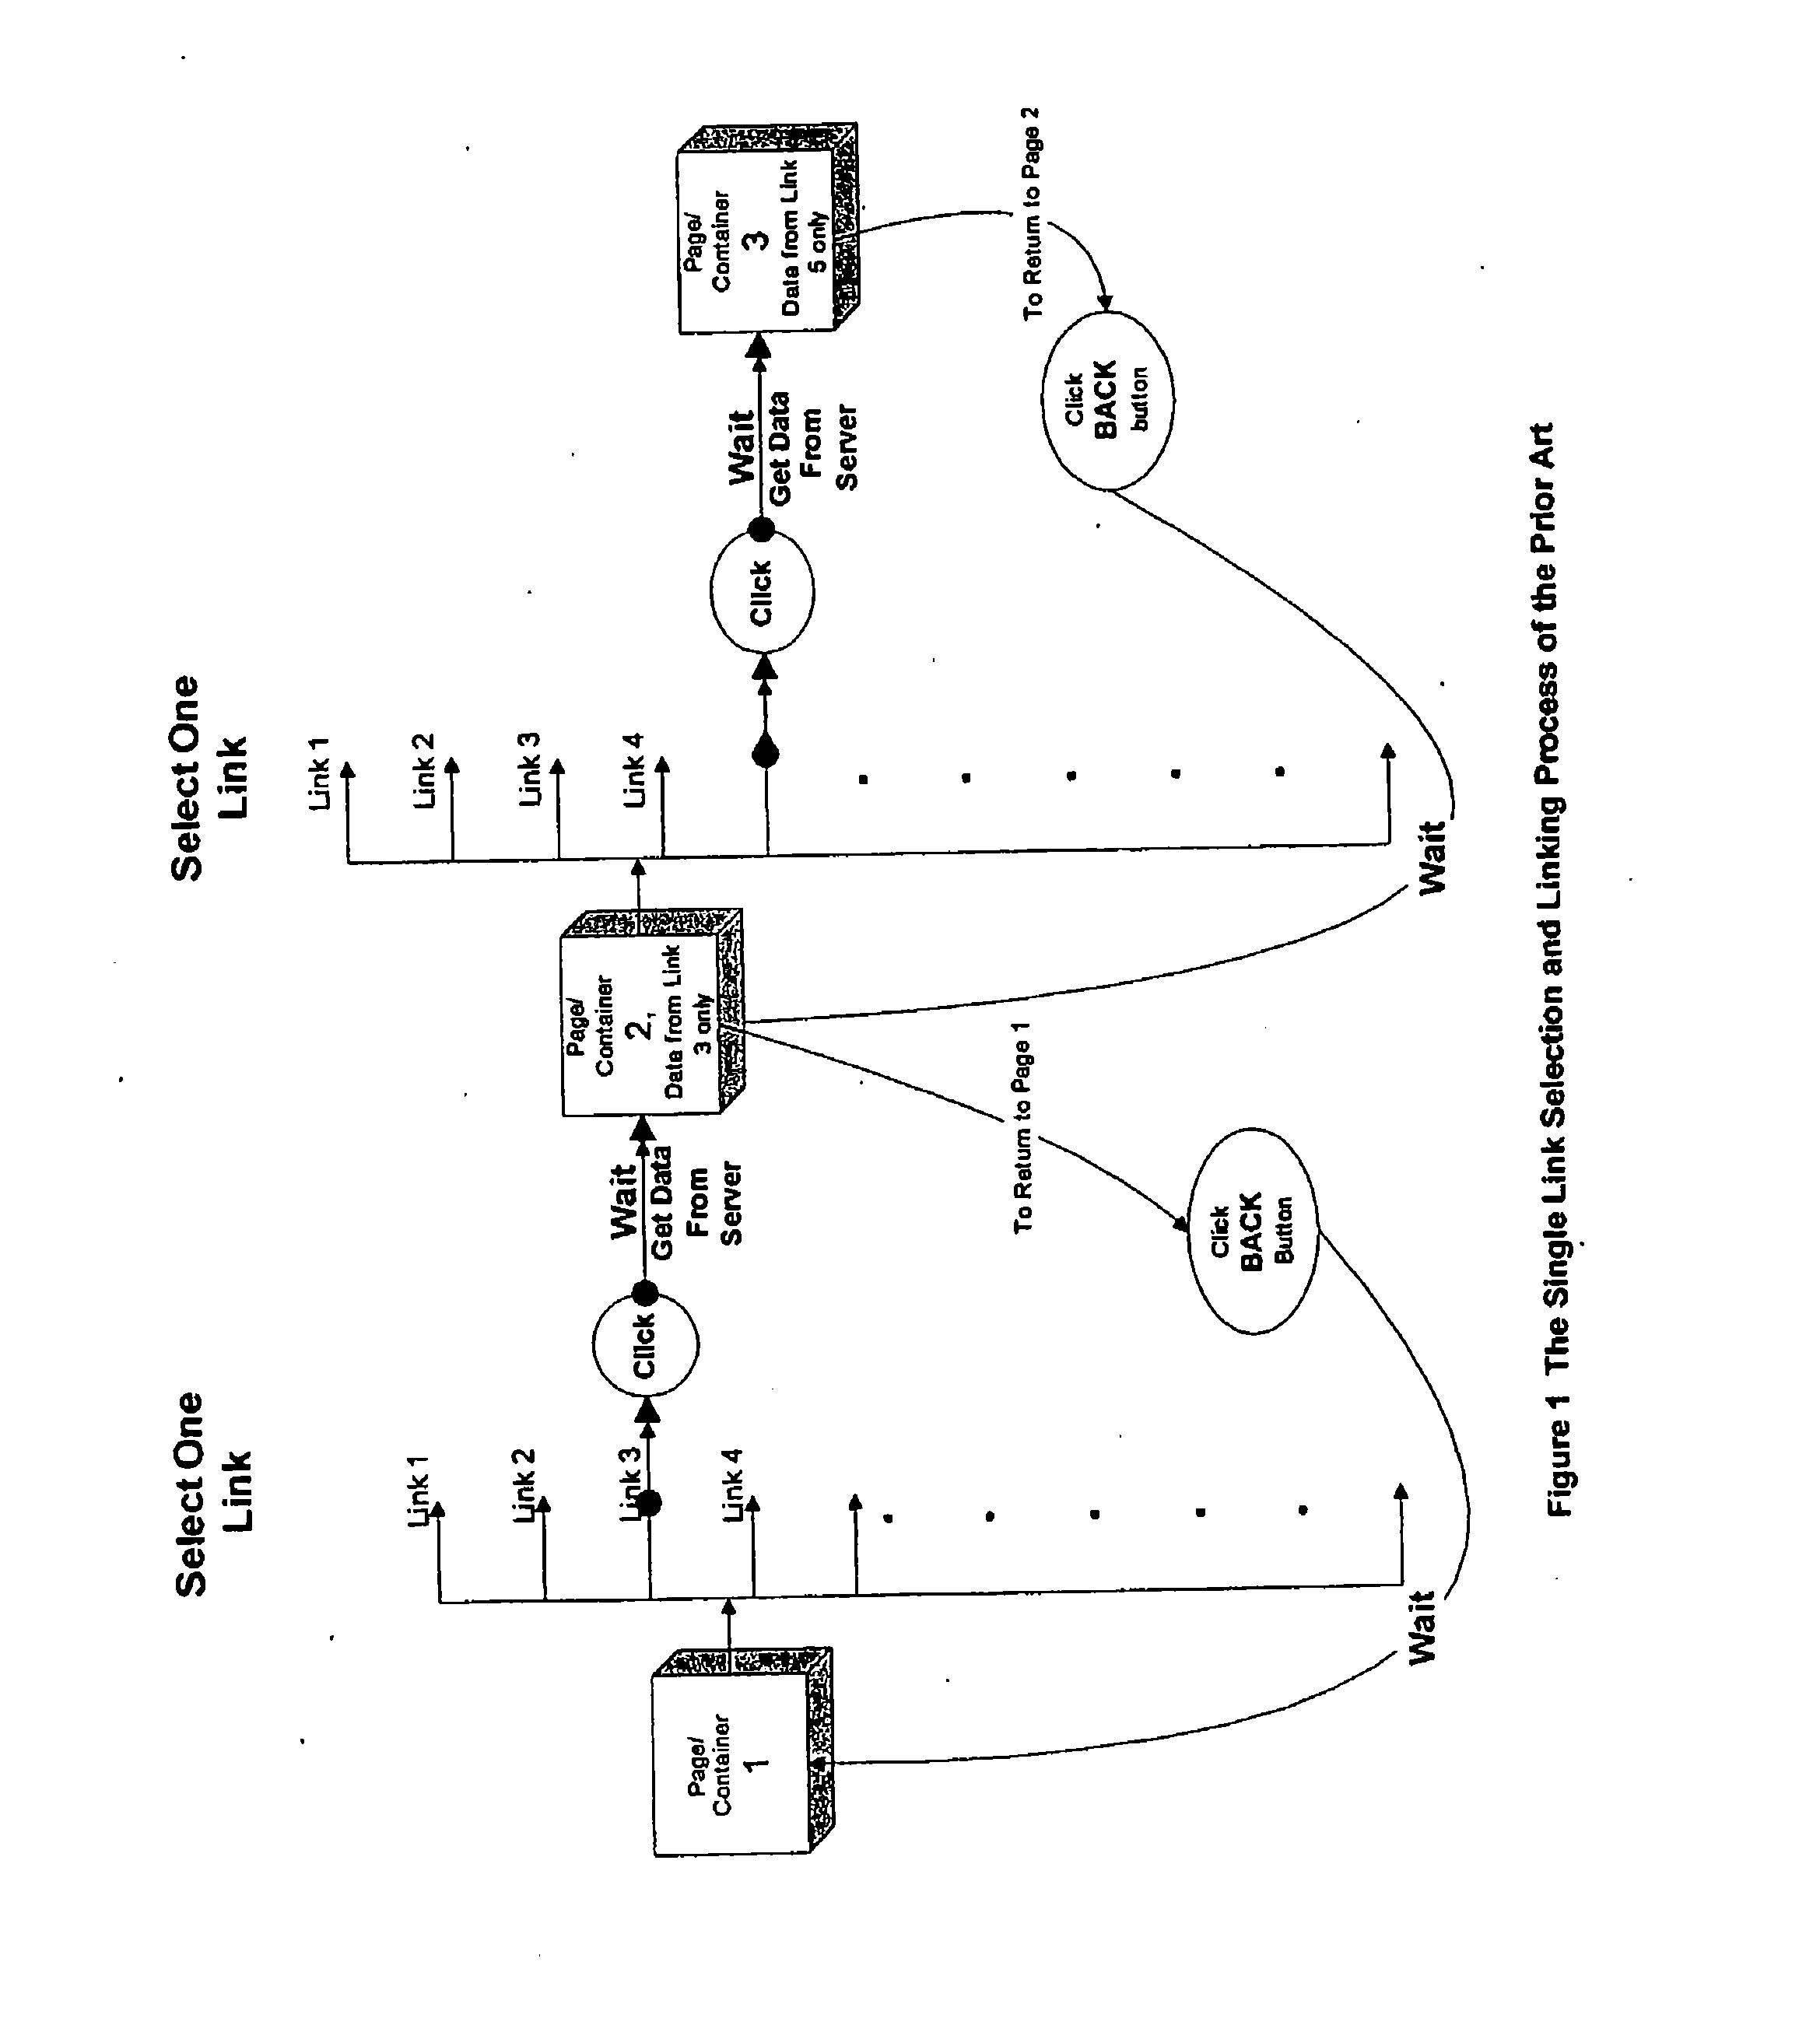 Dynamic array presentation and multiple selection of digitally stored objects and corresponding link tokens for simultaneous presentation